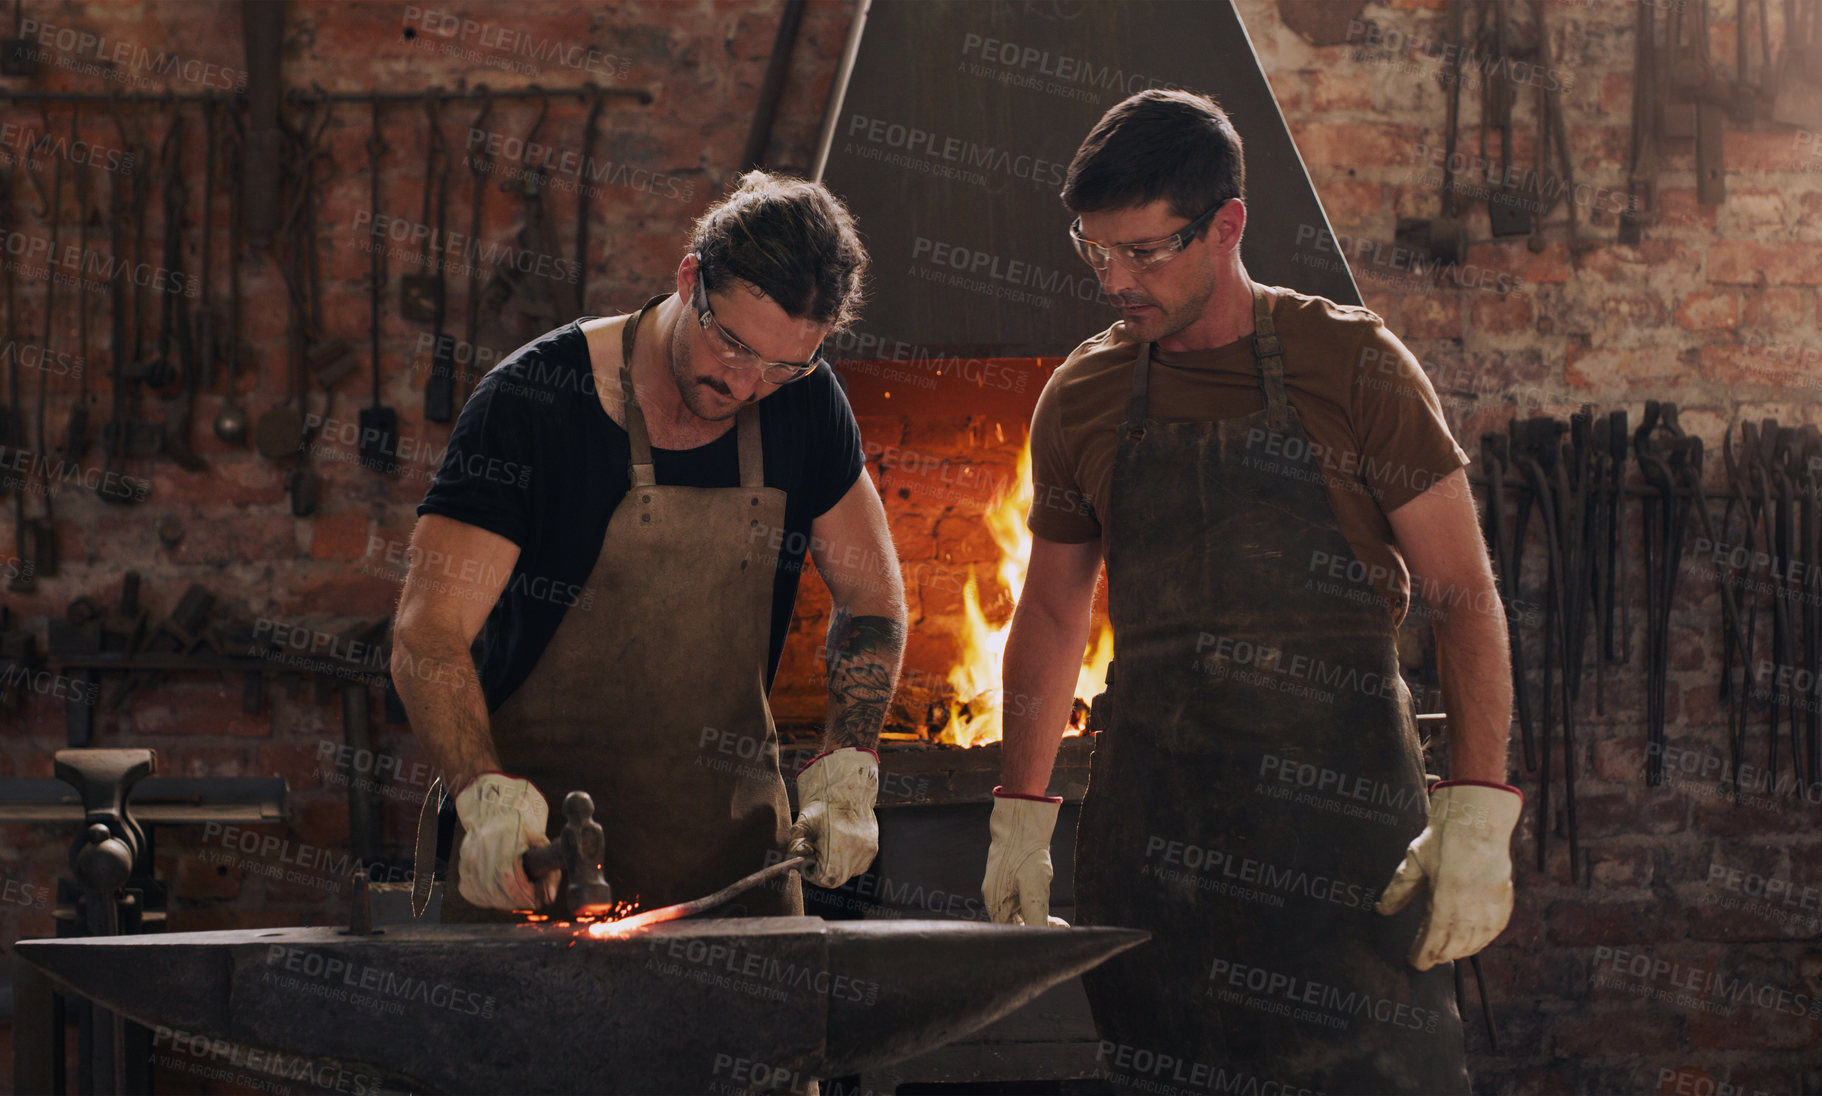 Buy stock photo Shot of two metal workers working together in a workshop